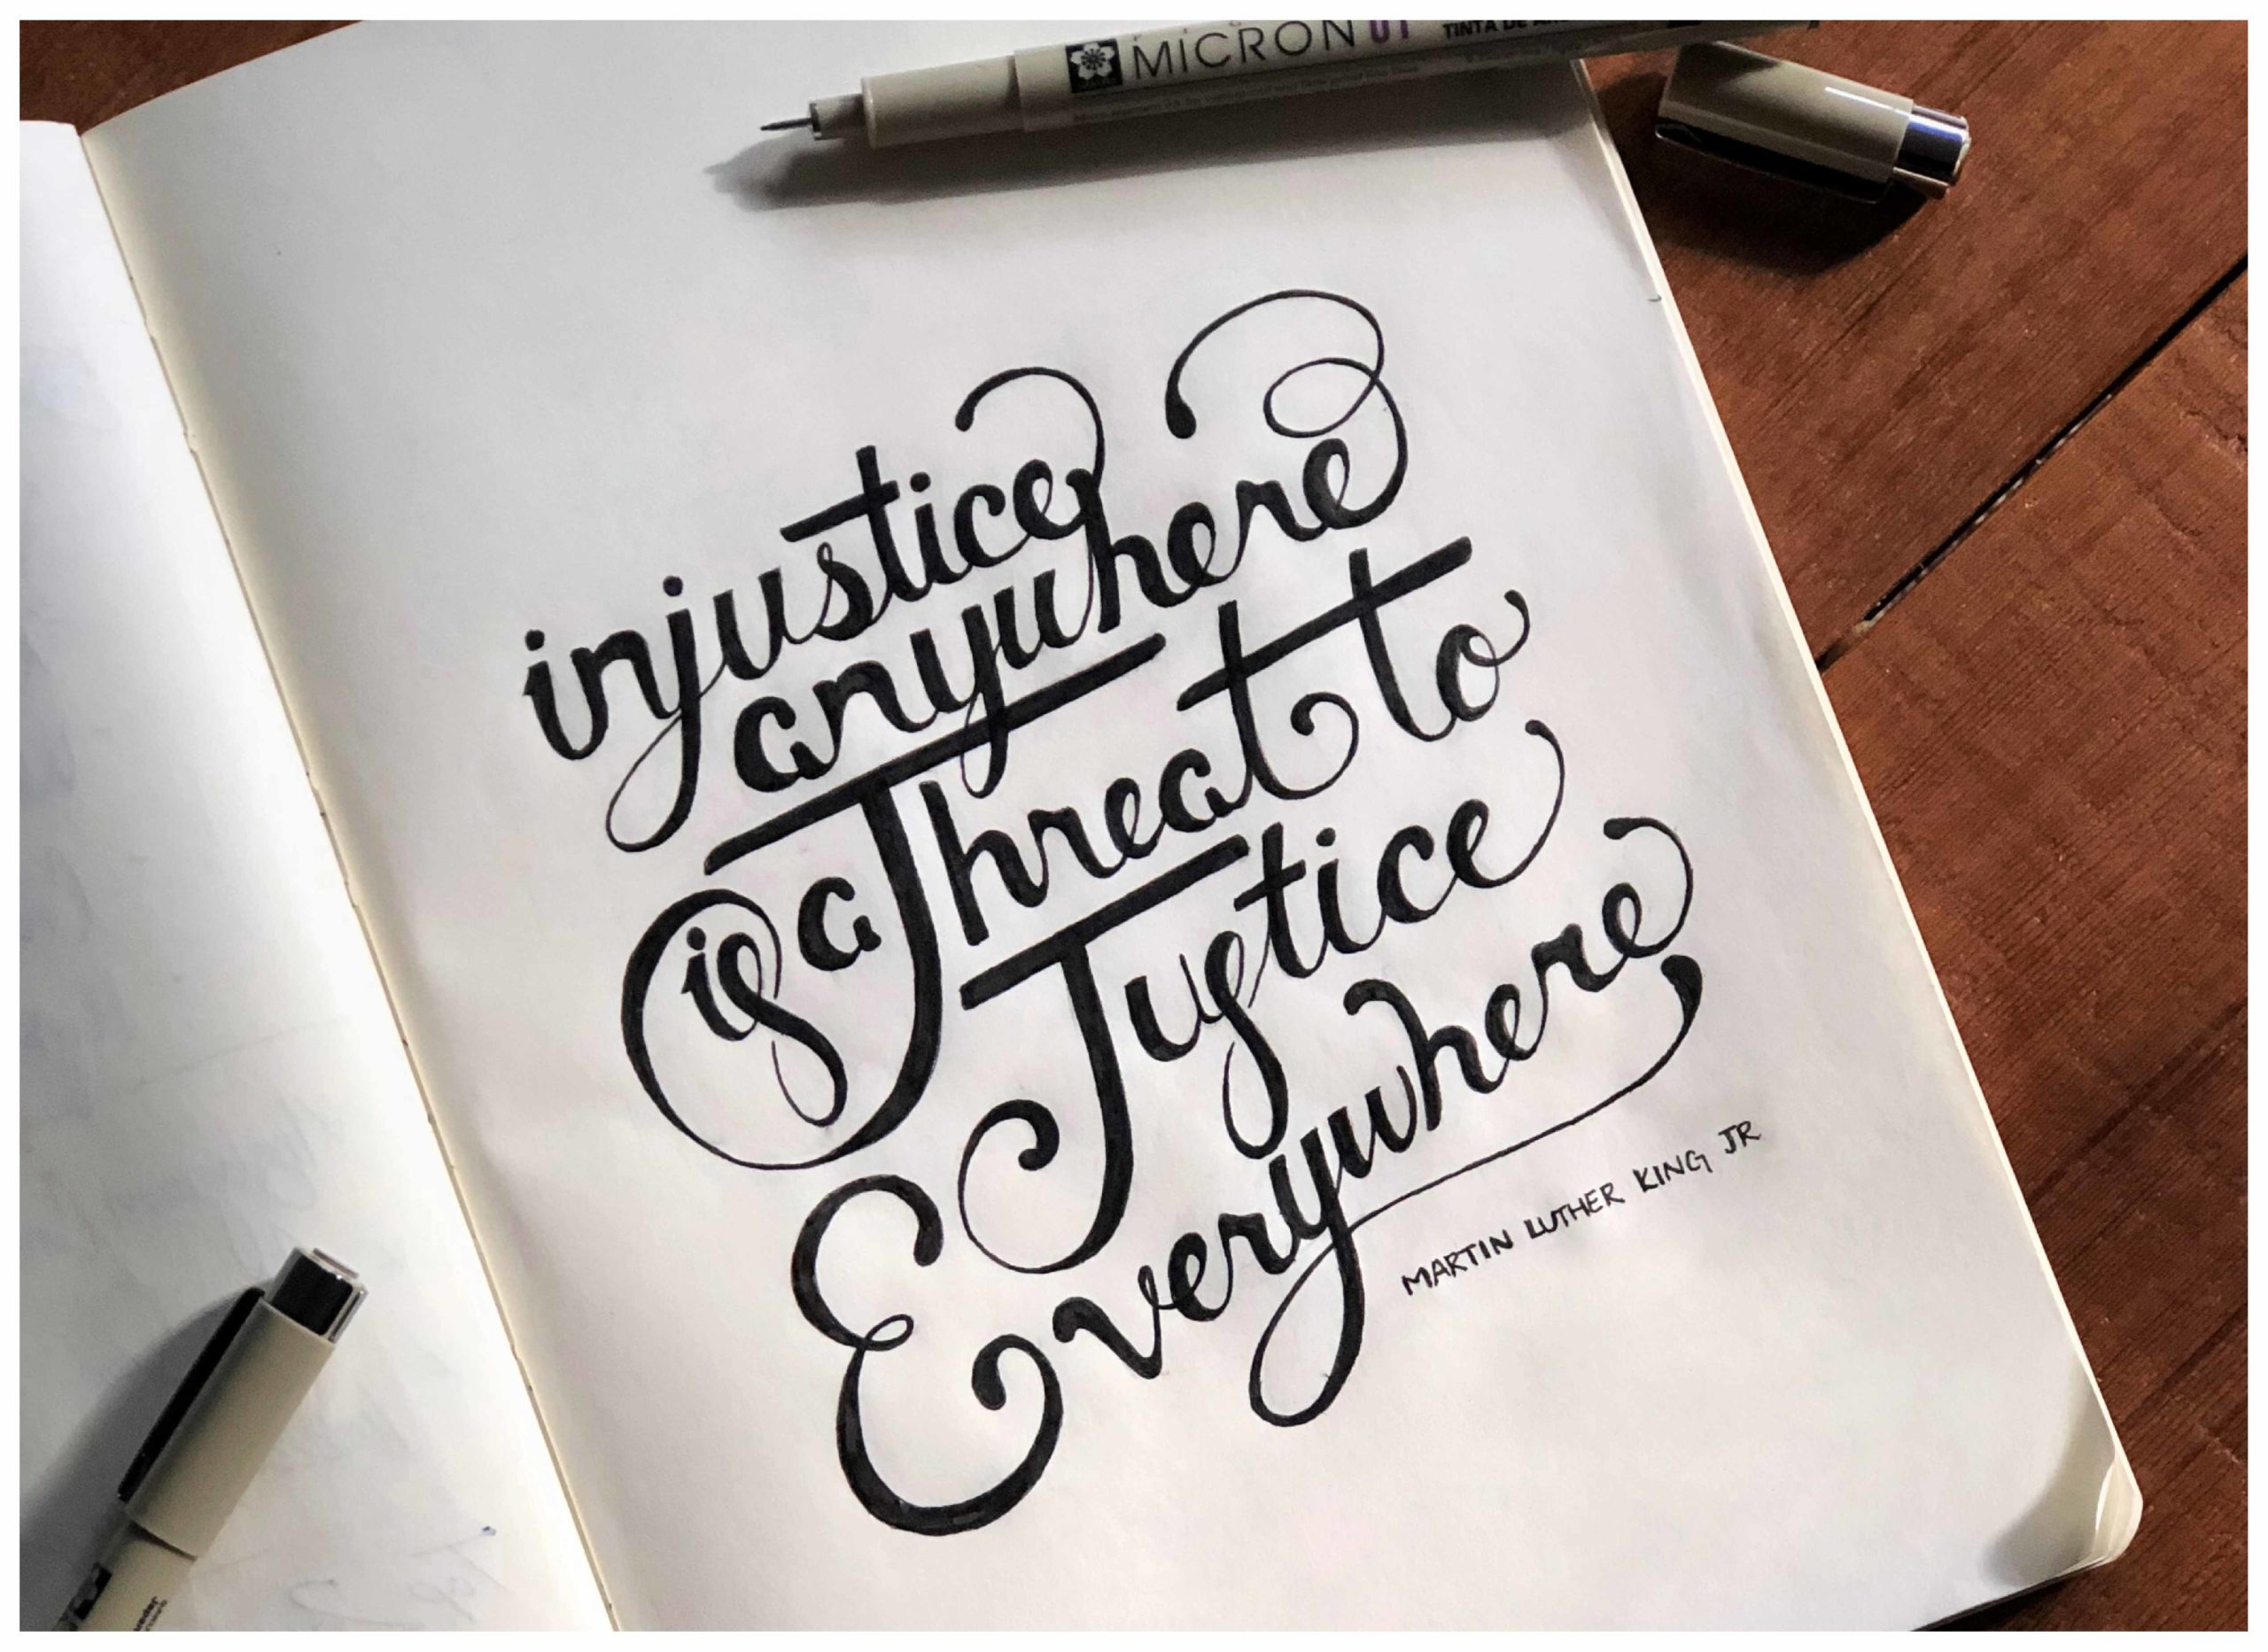 MLK Jr. quote caligraphy